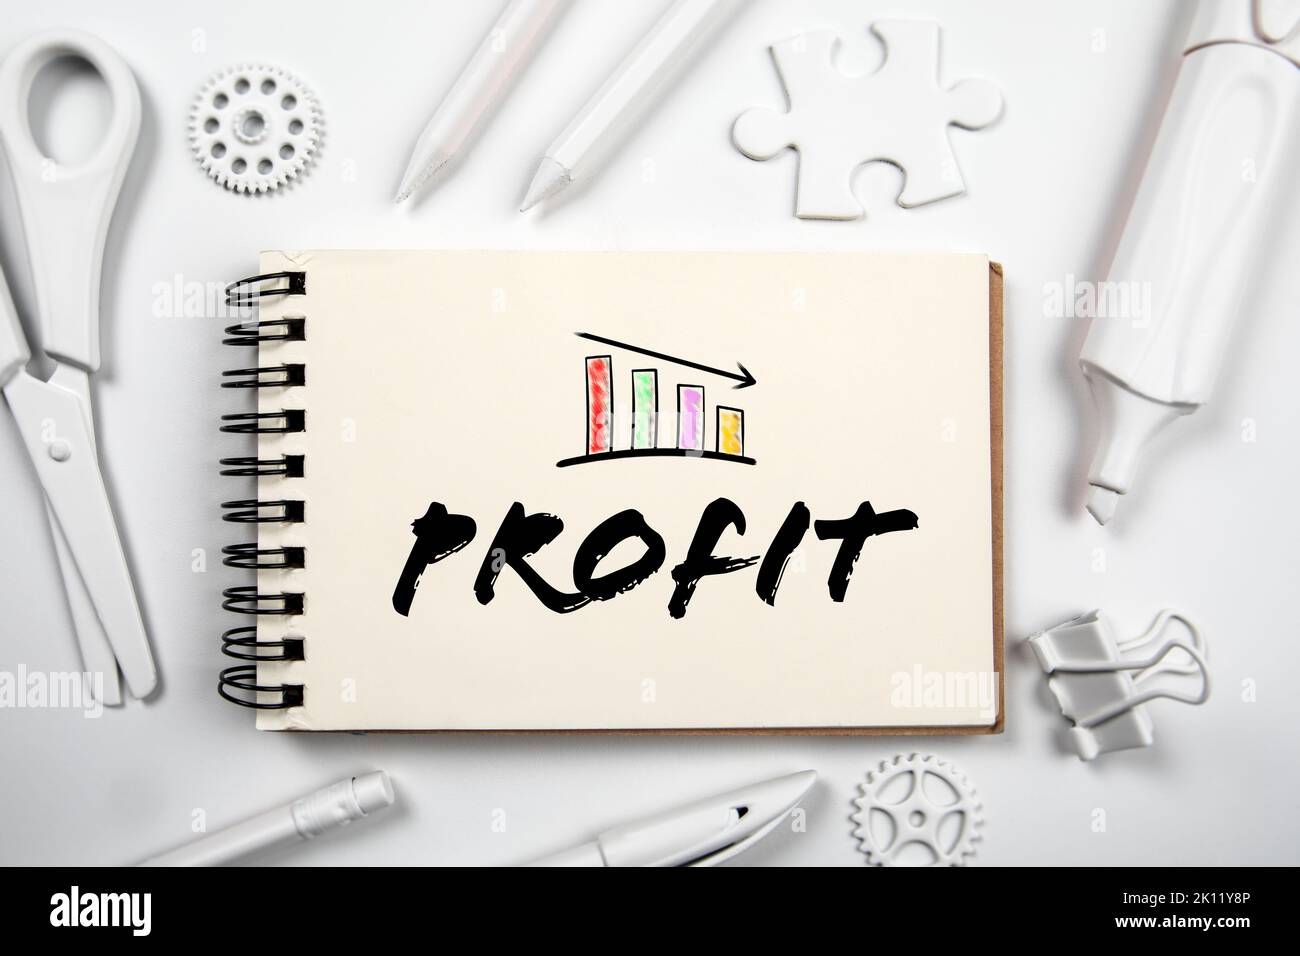 Profit concept. Graph and text on a white notepad. Stock Photo